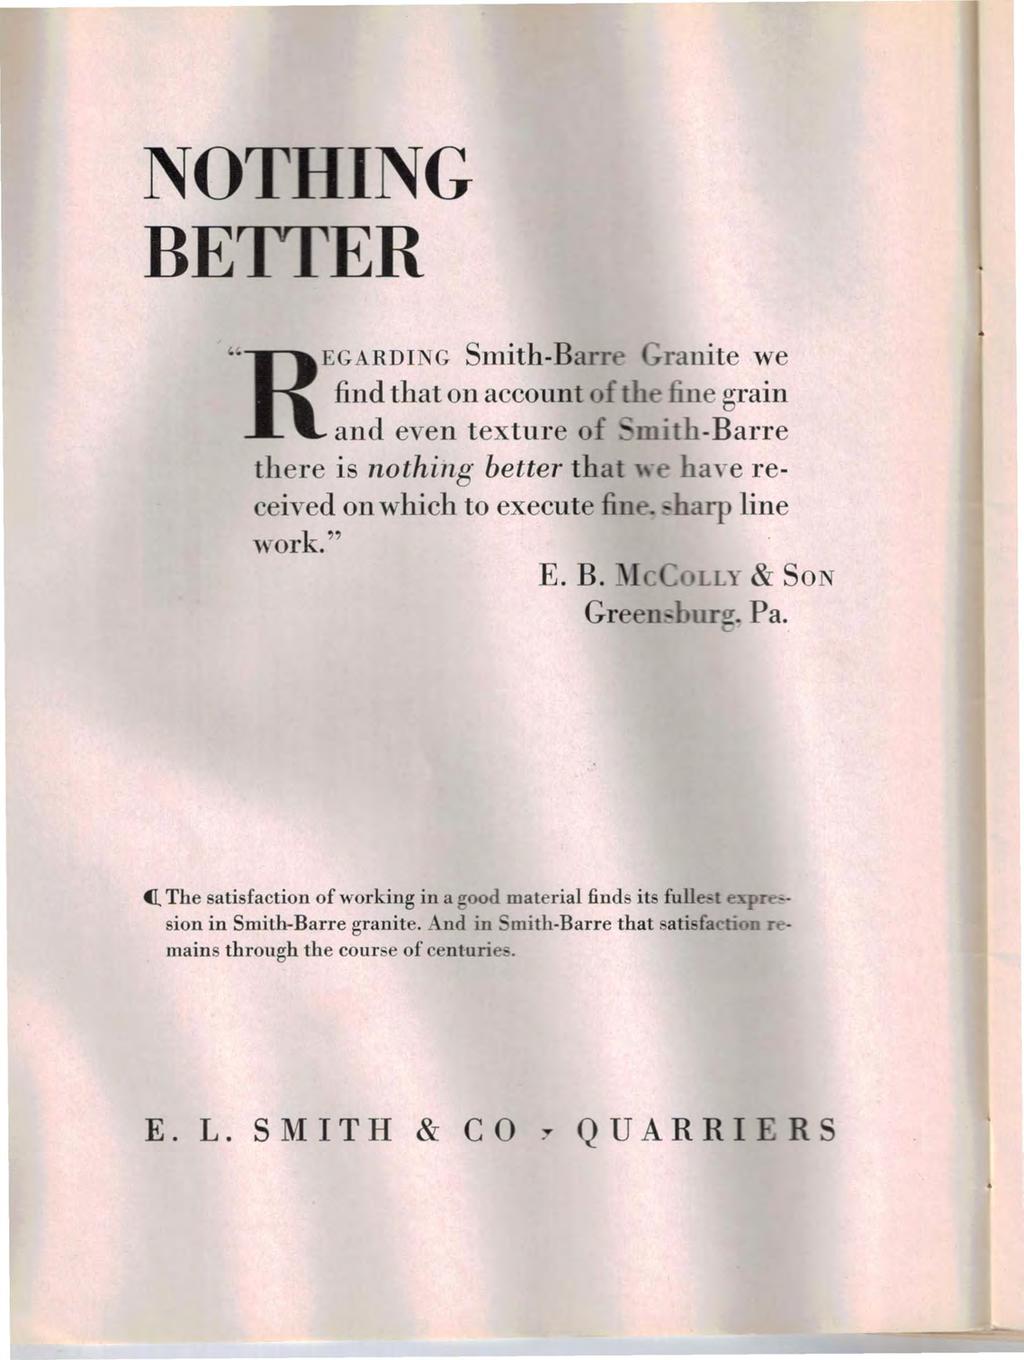 NOTHING BElTER ;R EGARDING Smith-Bar ranite we find that on account th ne grain and even texture of mith-barre there is nothing better that - ceived on which to execute fin work." E. B. ~i Green;: aye reline Y& SON f!